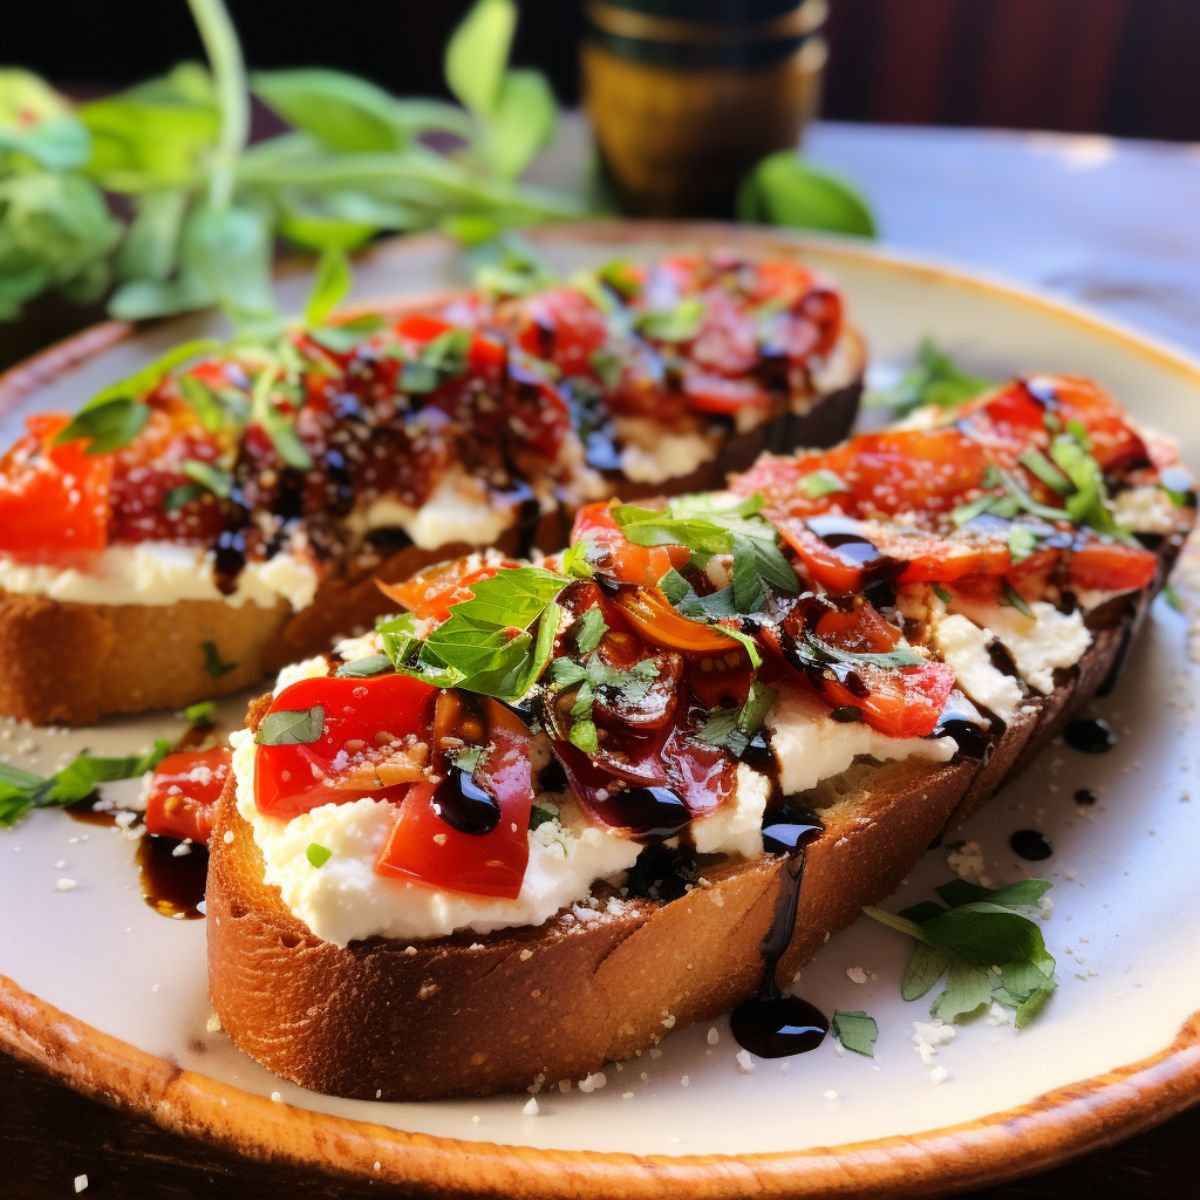 2 Cottage cheese toasts with tomatoes, basil, and balsamic glaze